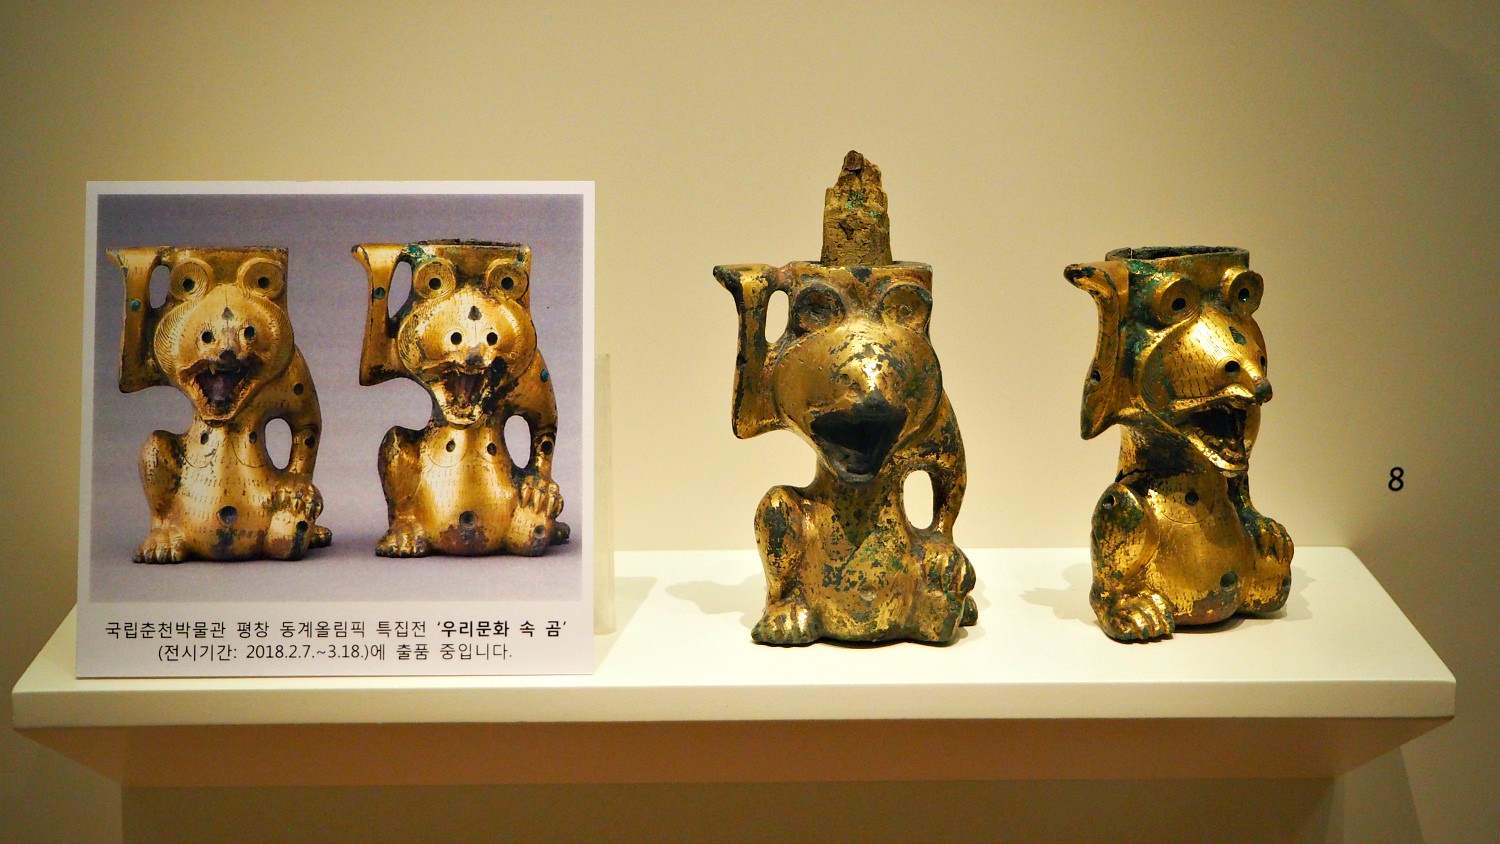 Buyeo Kingdom Artifacts page briefly describes the treasures made by artisans handed from one generation to the next and for all the world to see-at the museum.